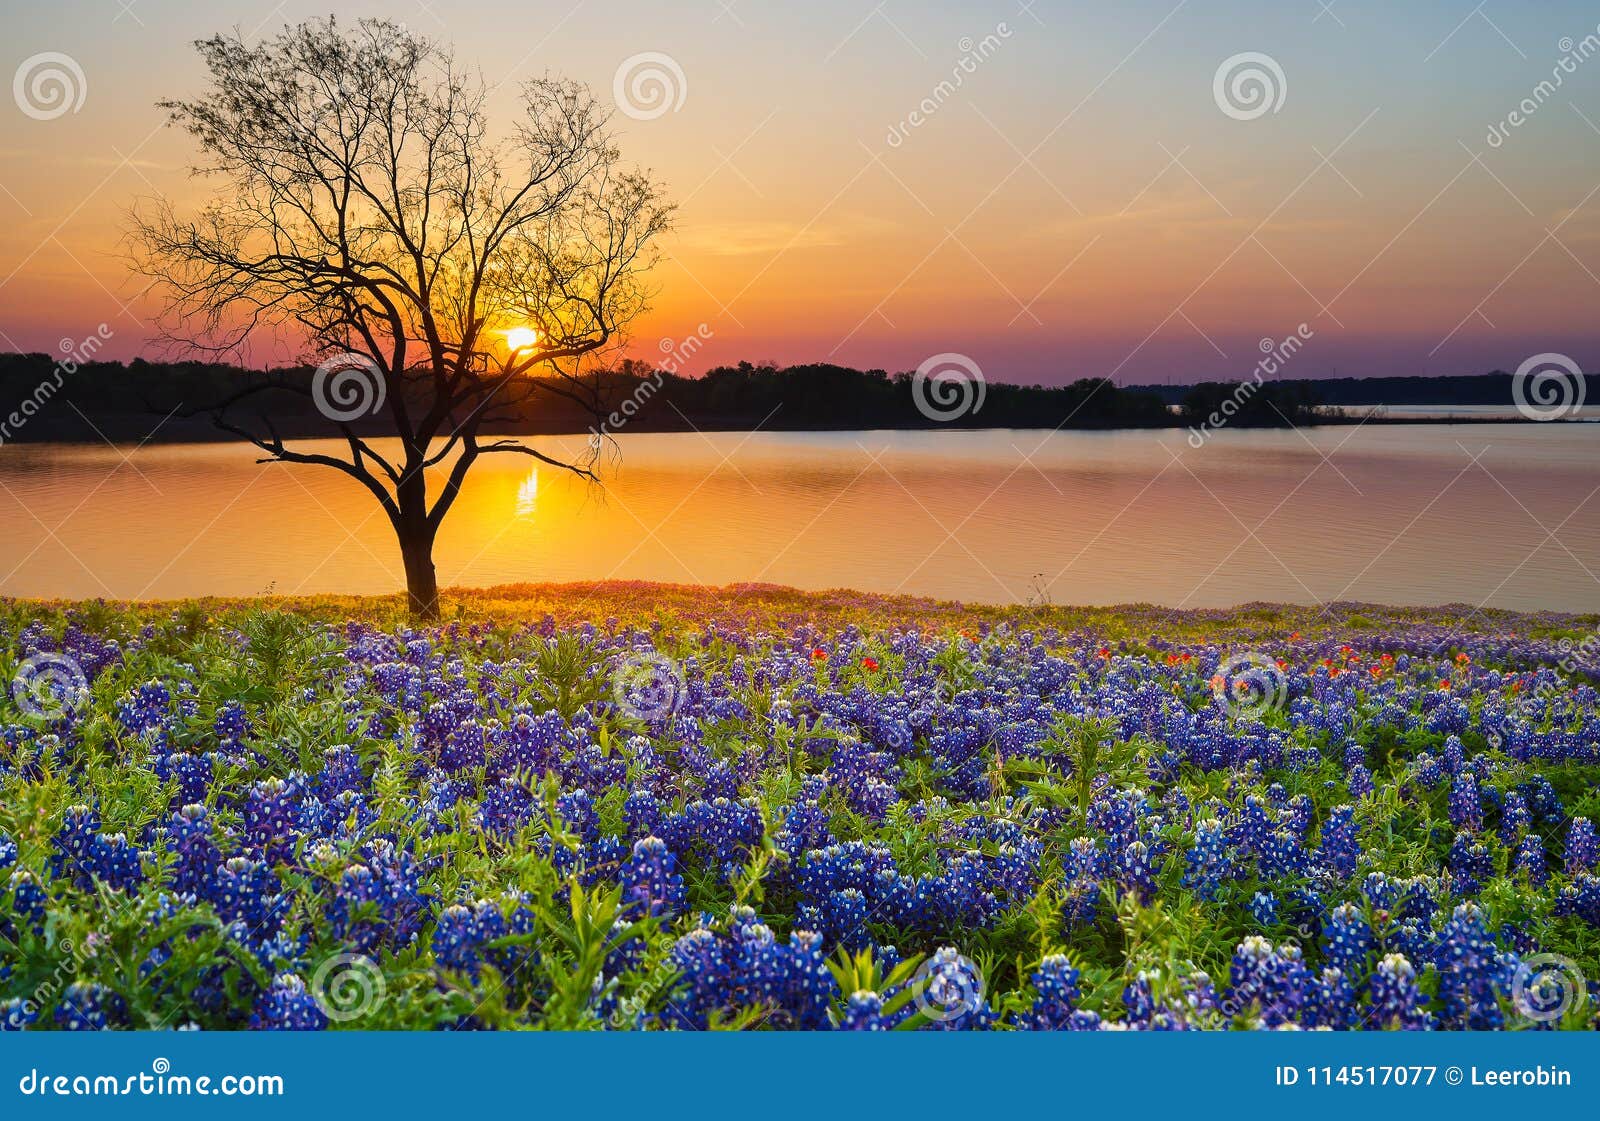 beautiful texas spring sunset over a lake